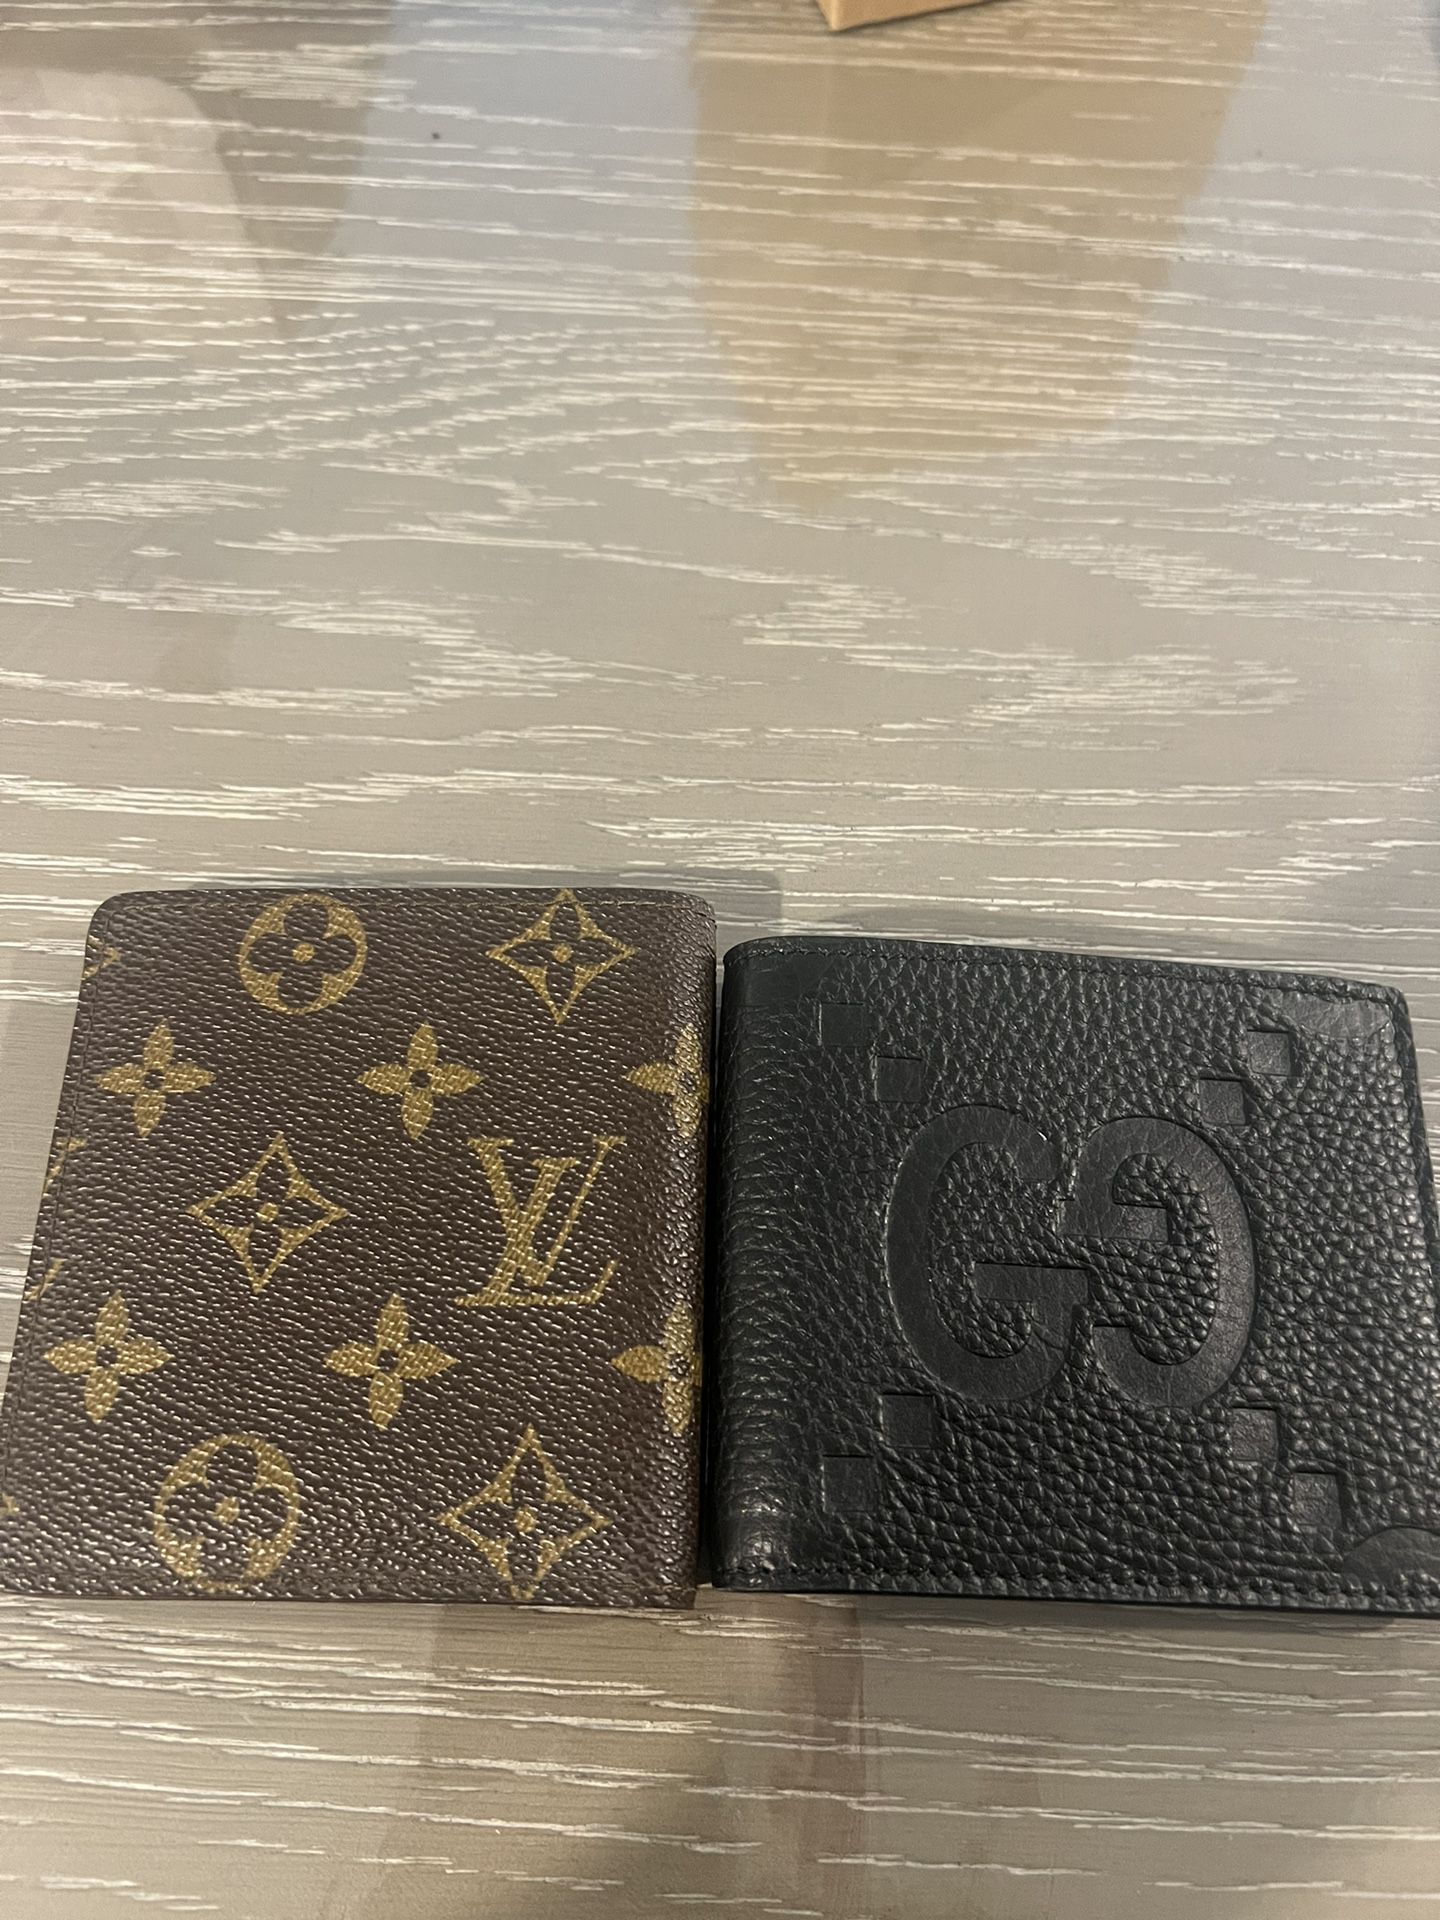 Lv And Gucci Wallet 